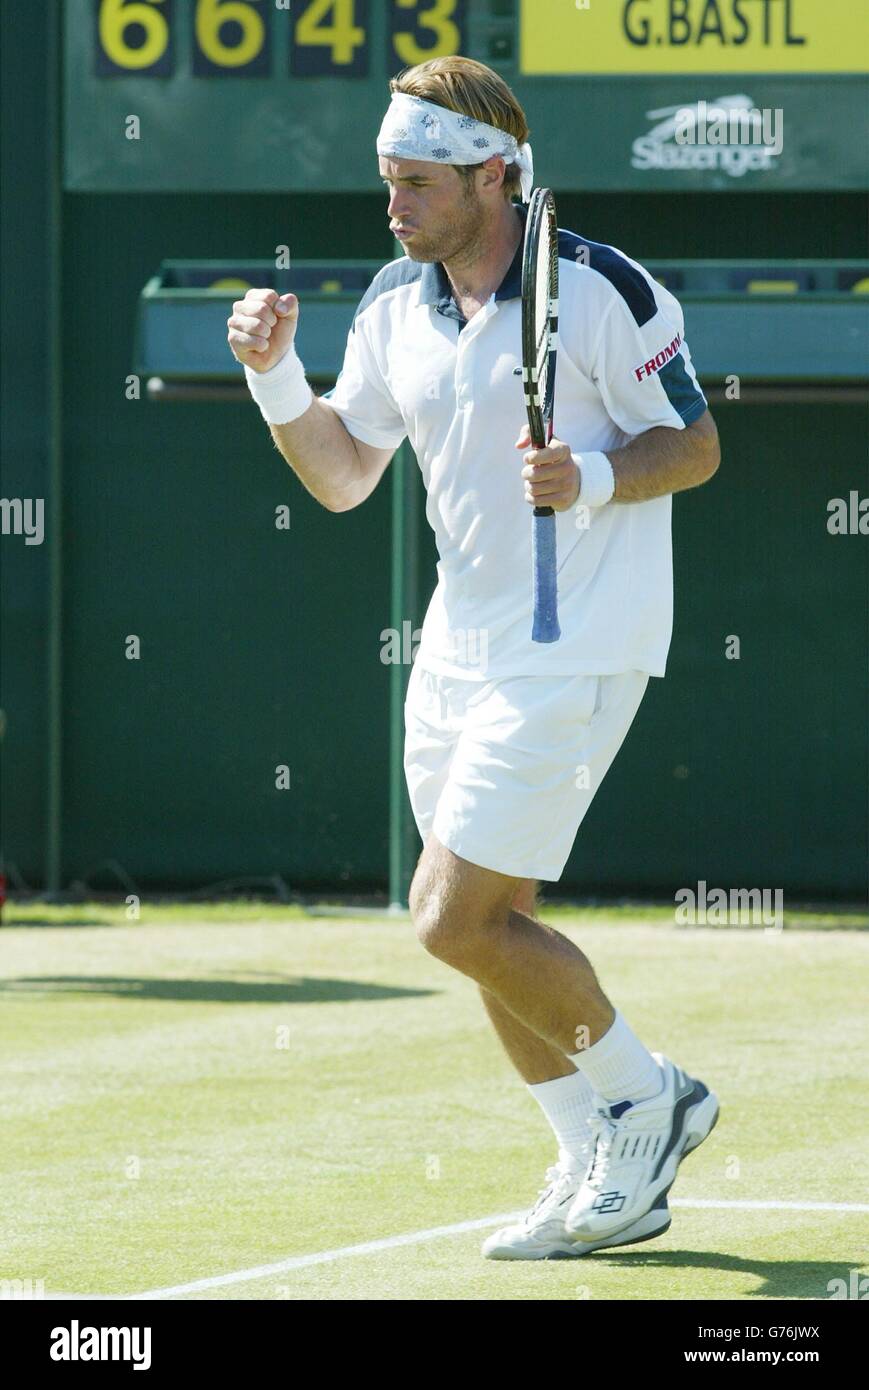 , NO COMMERCIAL USE. Un-seeded Swiss tennis player George Bastl celebrates break point against seven times Wimbledon Champion Pete Sampras in a five set epic at The All England Lawn Tennis Club. Bastl eventually triumphed 6:3/6:2/4:6/3:6/6:4. Stock Photo